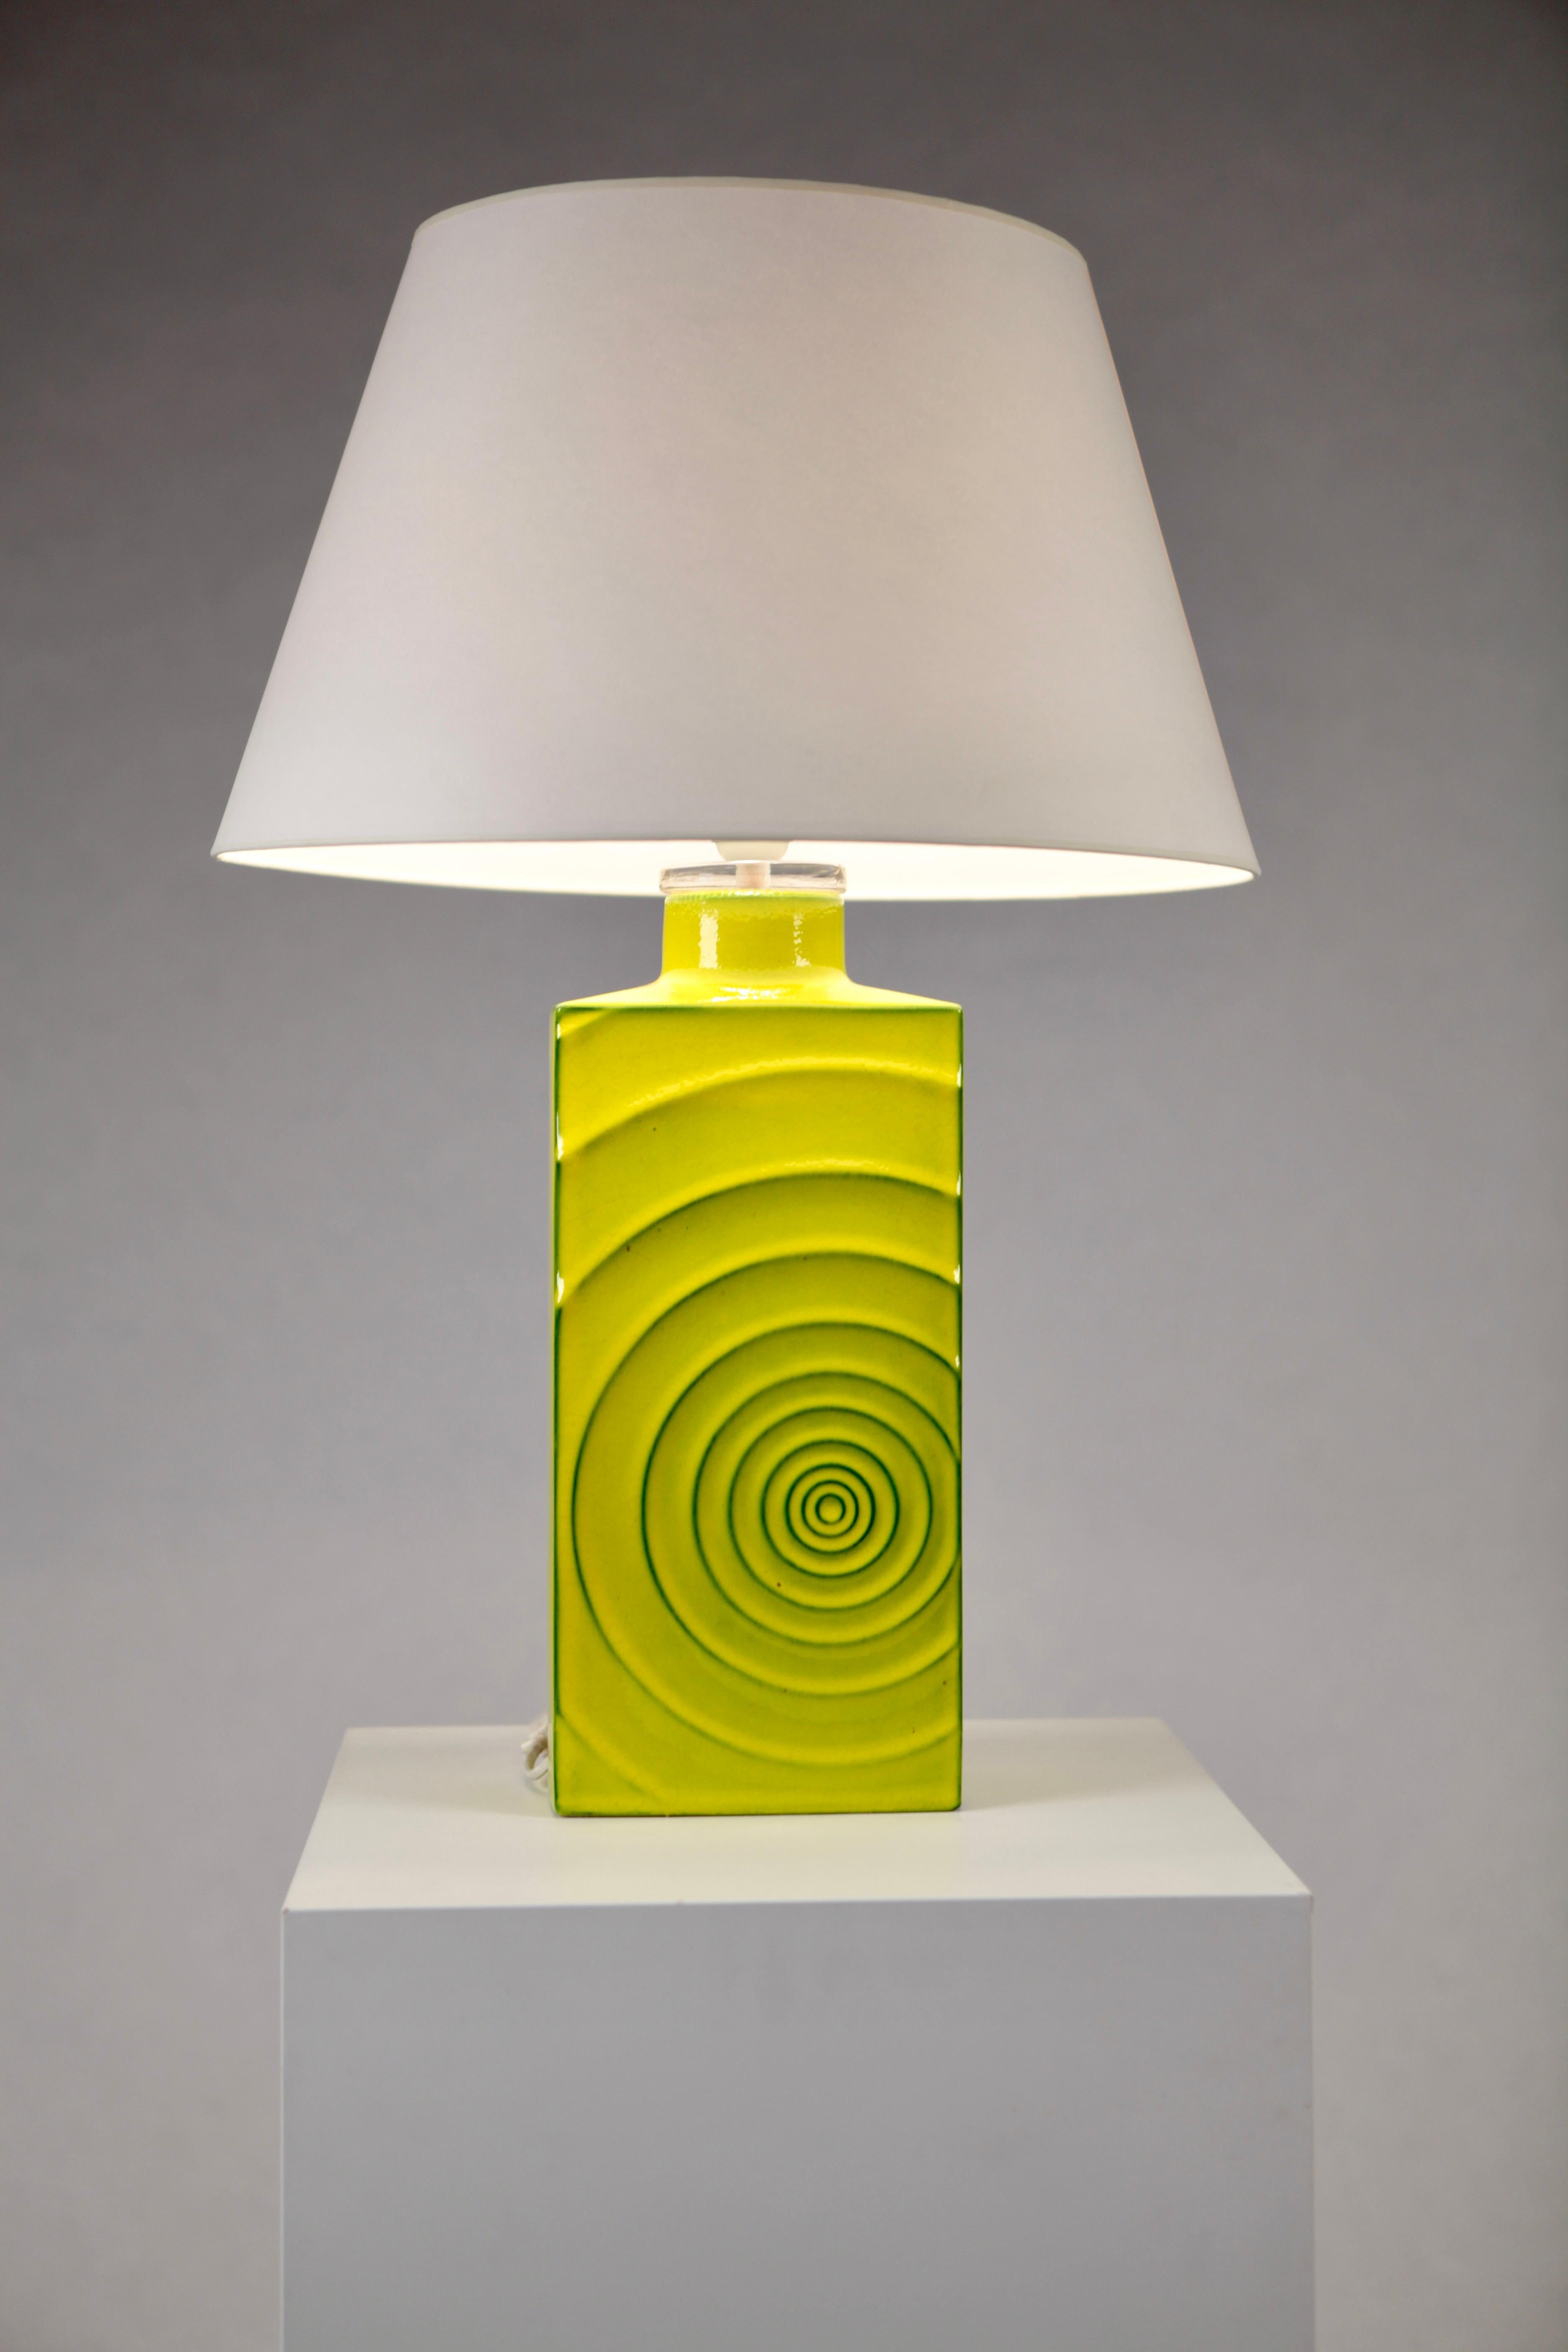 A rare yellow glazed ceramic table lamp by Cari Zalloni, model 'Zyklon', executed by Steulet & Co, Germany, 1960's.
Marked. Excellent condition, shade not included.